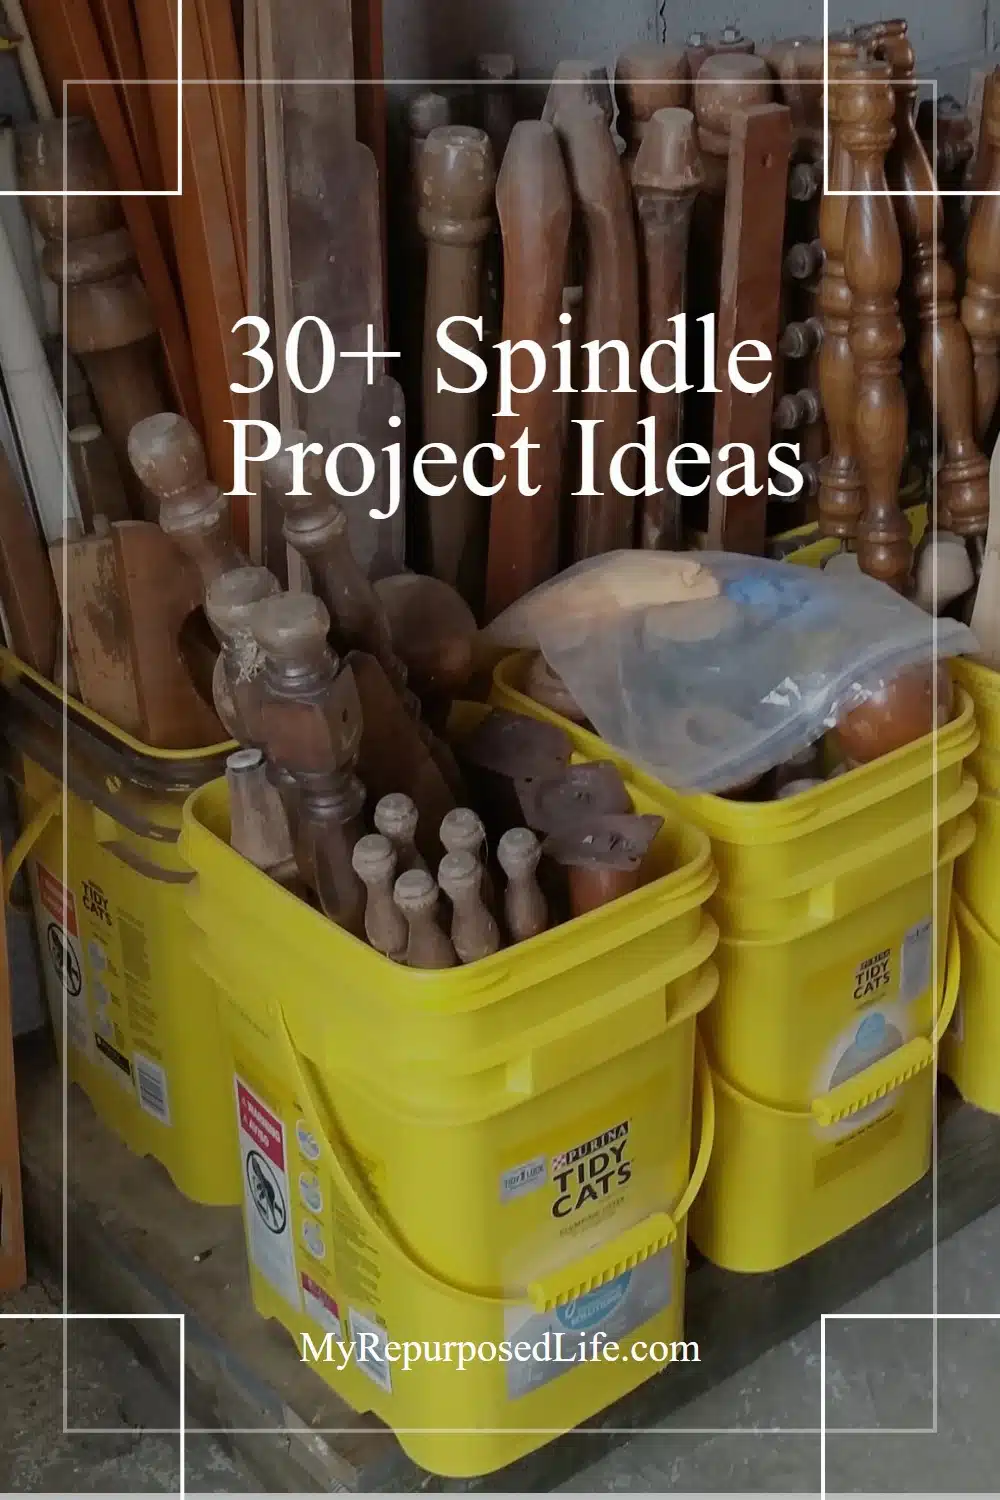 This large collection of wooden spindle projects will have your head spinning wondering just what you will make first! So many spindles so little time. #MyRepurposedLife #repurposed #woodenspindle #spindle #diy #project #roundup via @repurposedlife